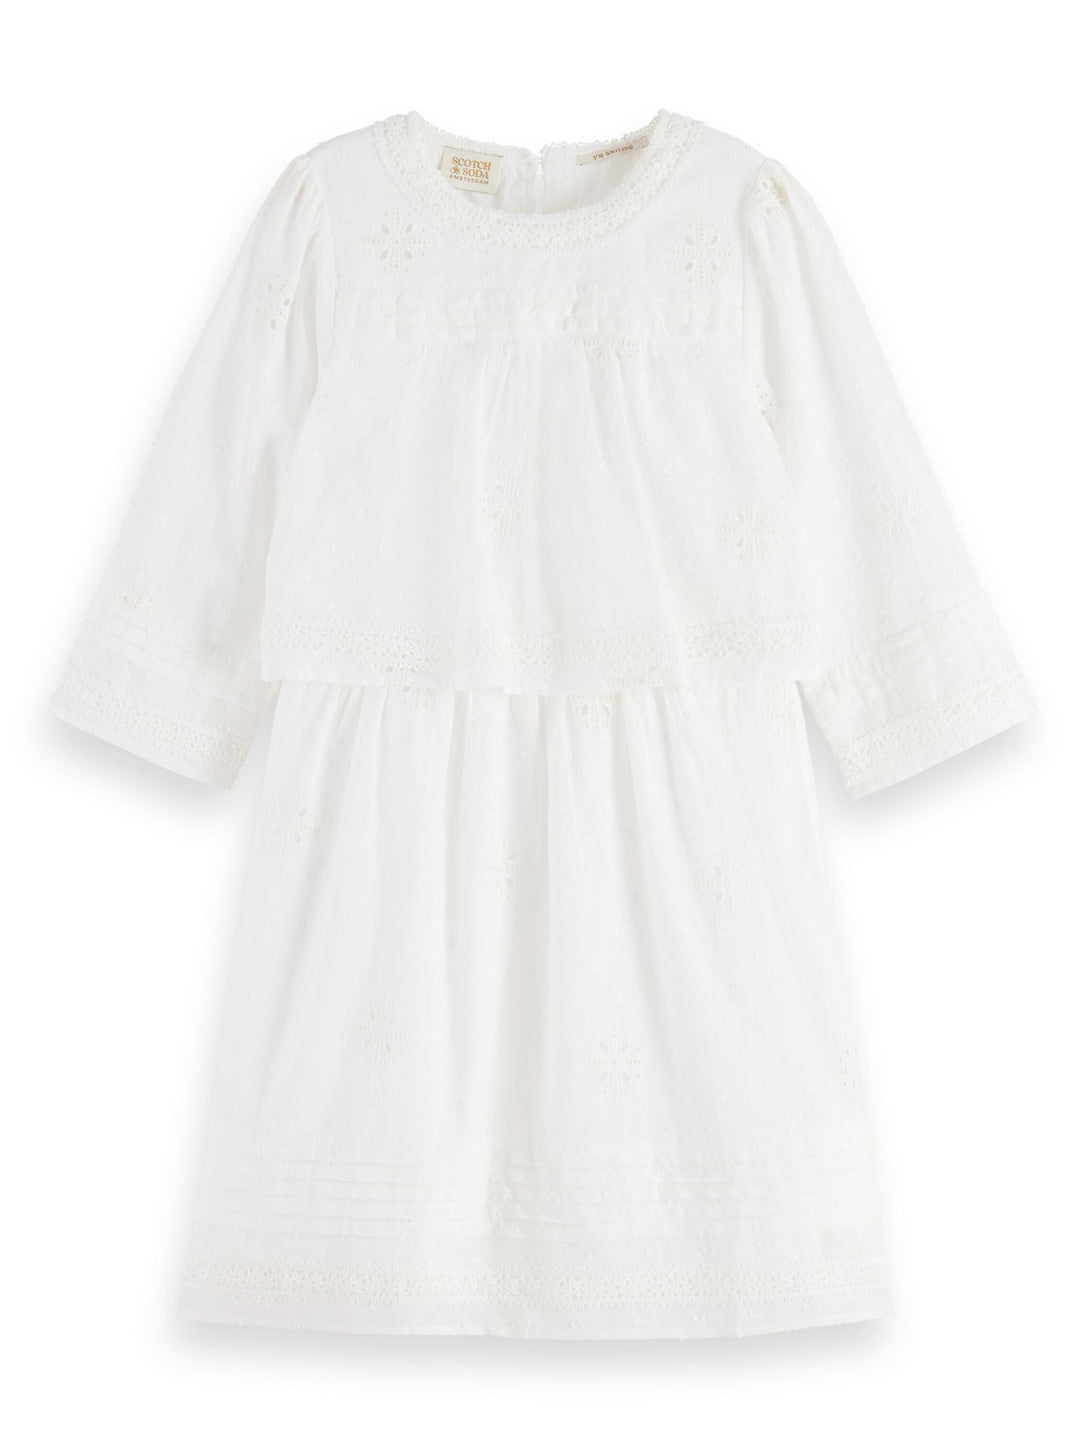 Broderie Anglaise 3/4 Sleeve Dress - Off White - Posh New York